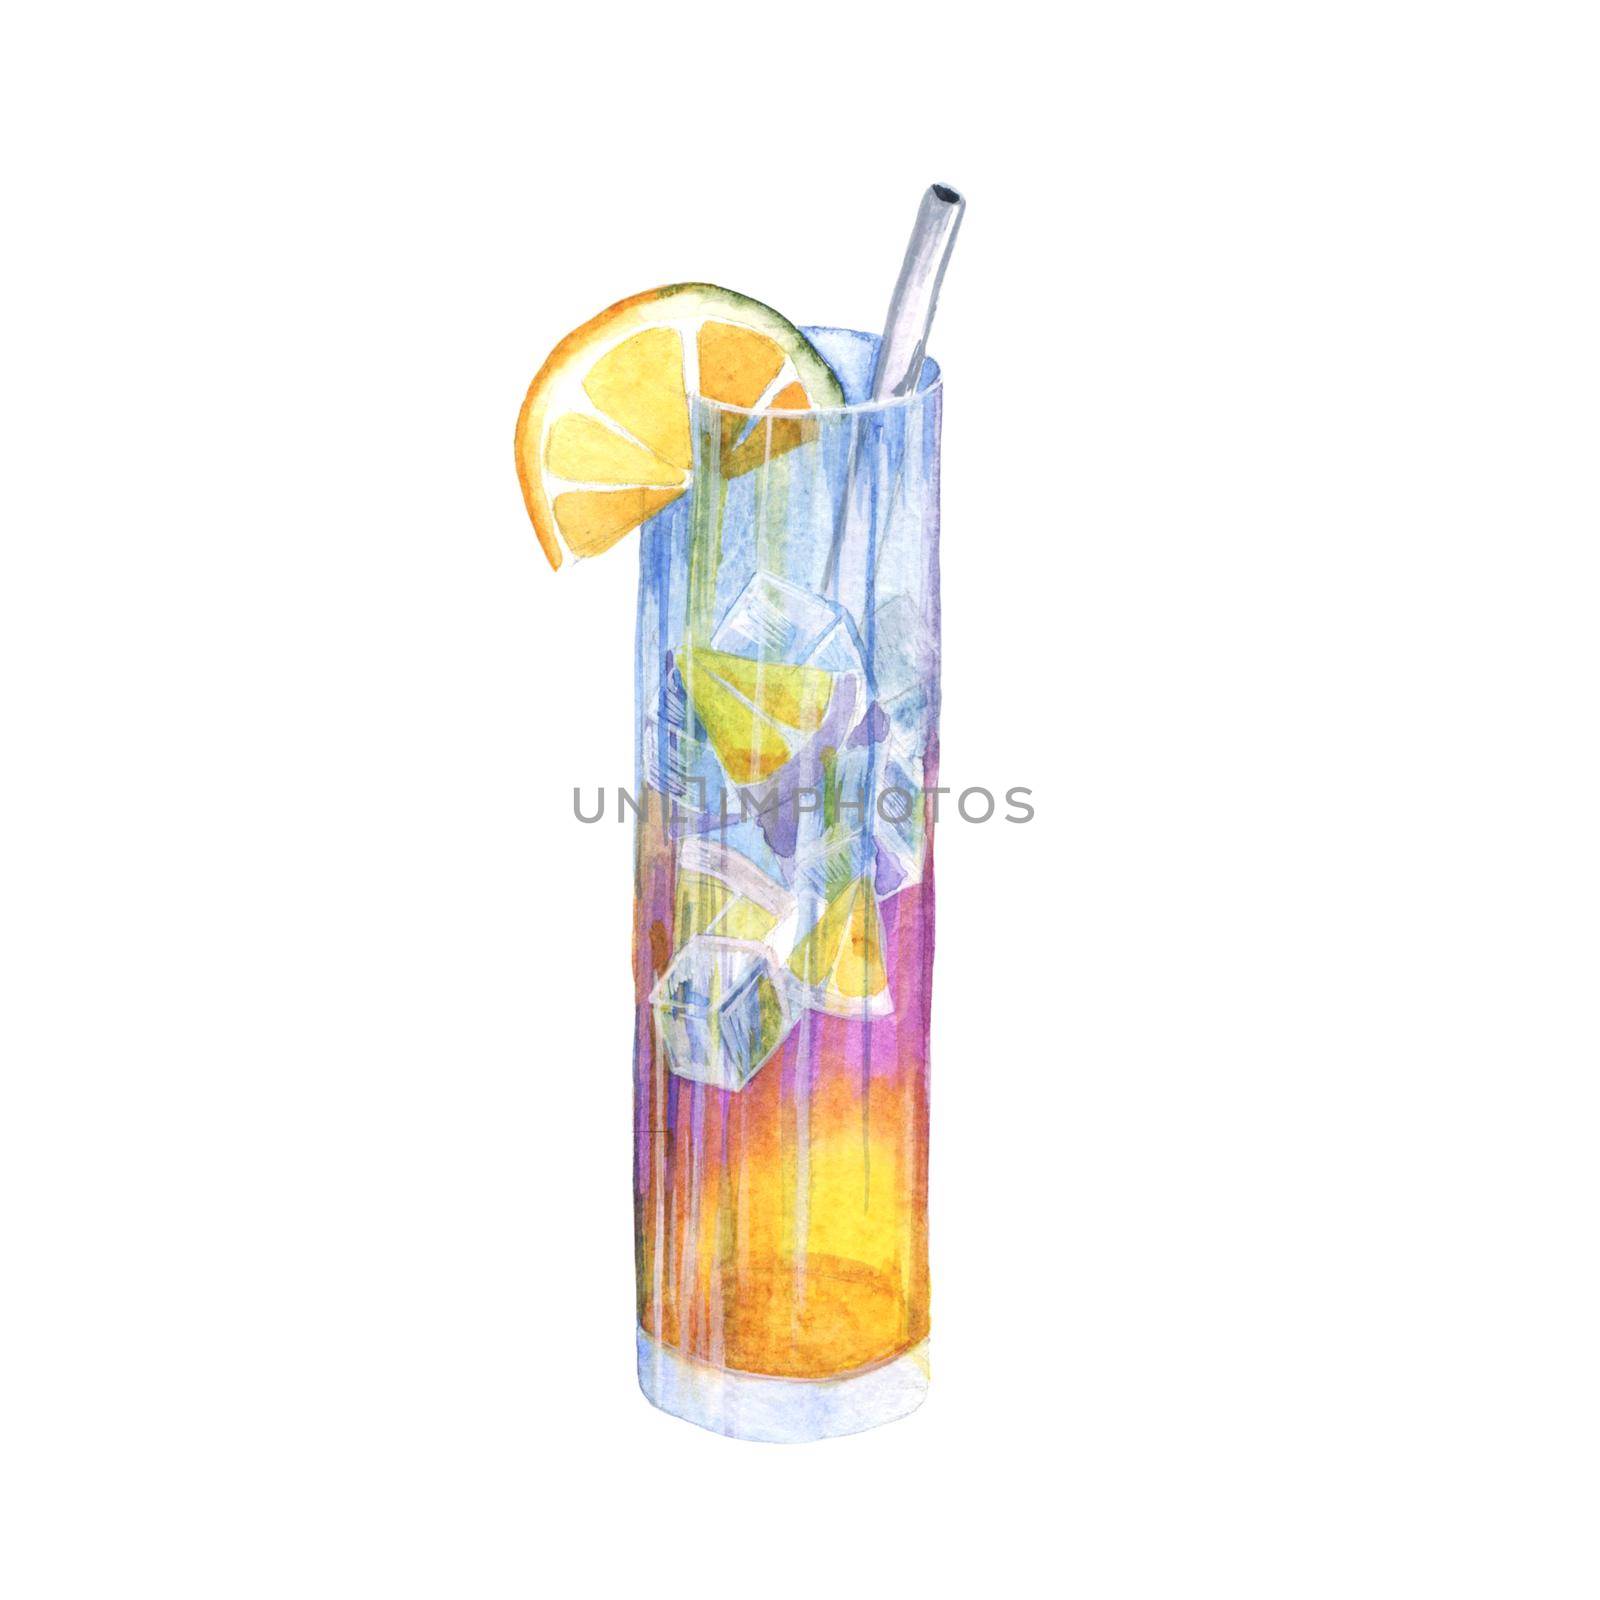 Watercolor lemonade with lemon, ice and syrup. Hand drawn isolated summer drink glass on white background. Artistic illustration.